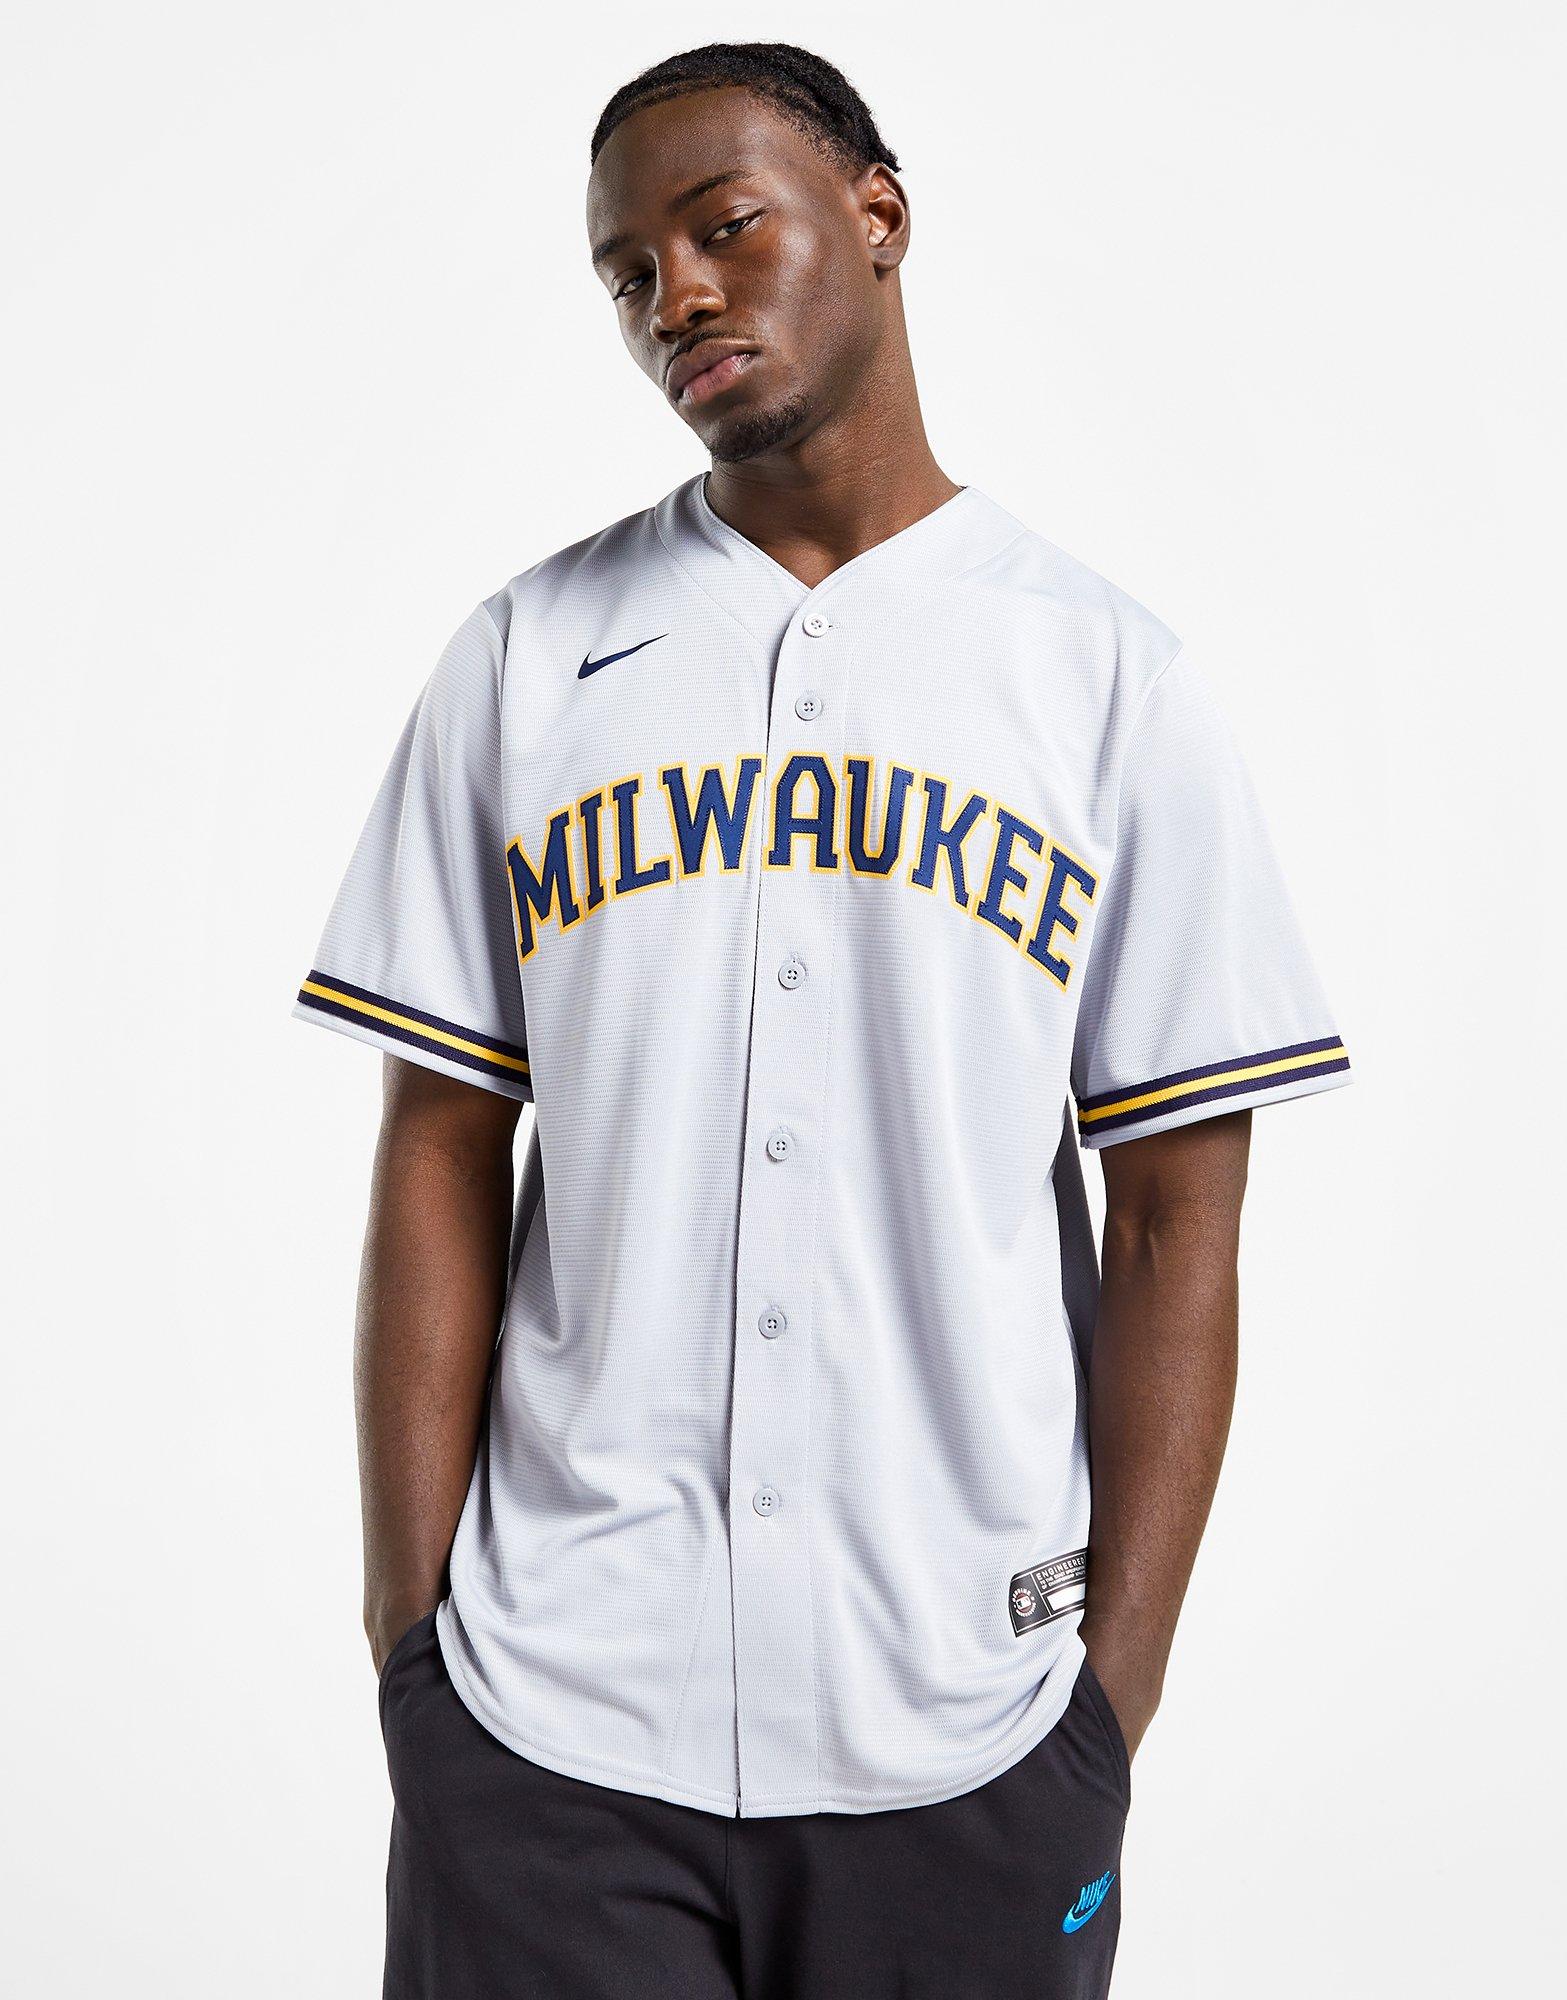 brewers jersey